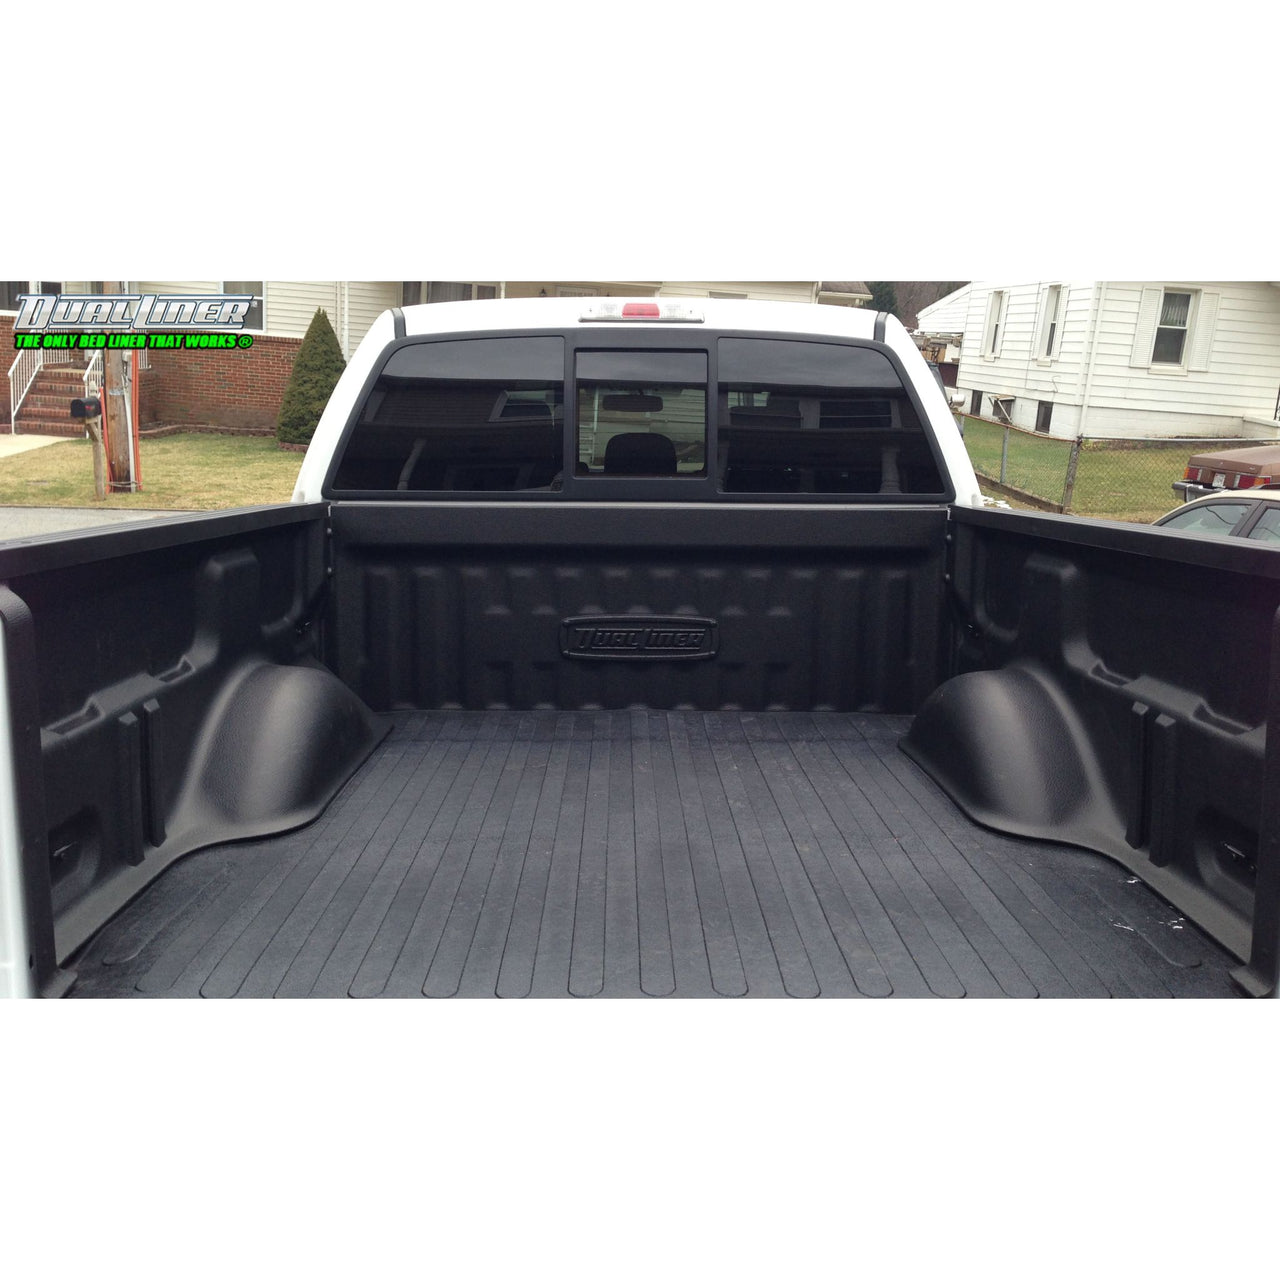 DualLiner 1999 to 2007 F-250 /F-350 - Long 8' Bed